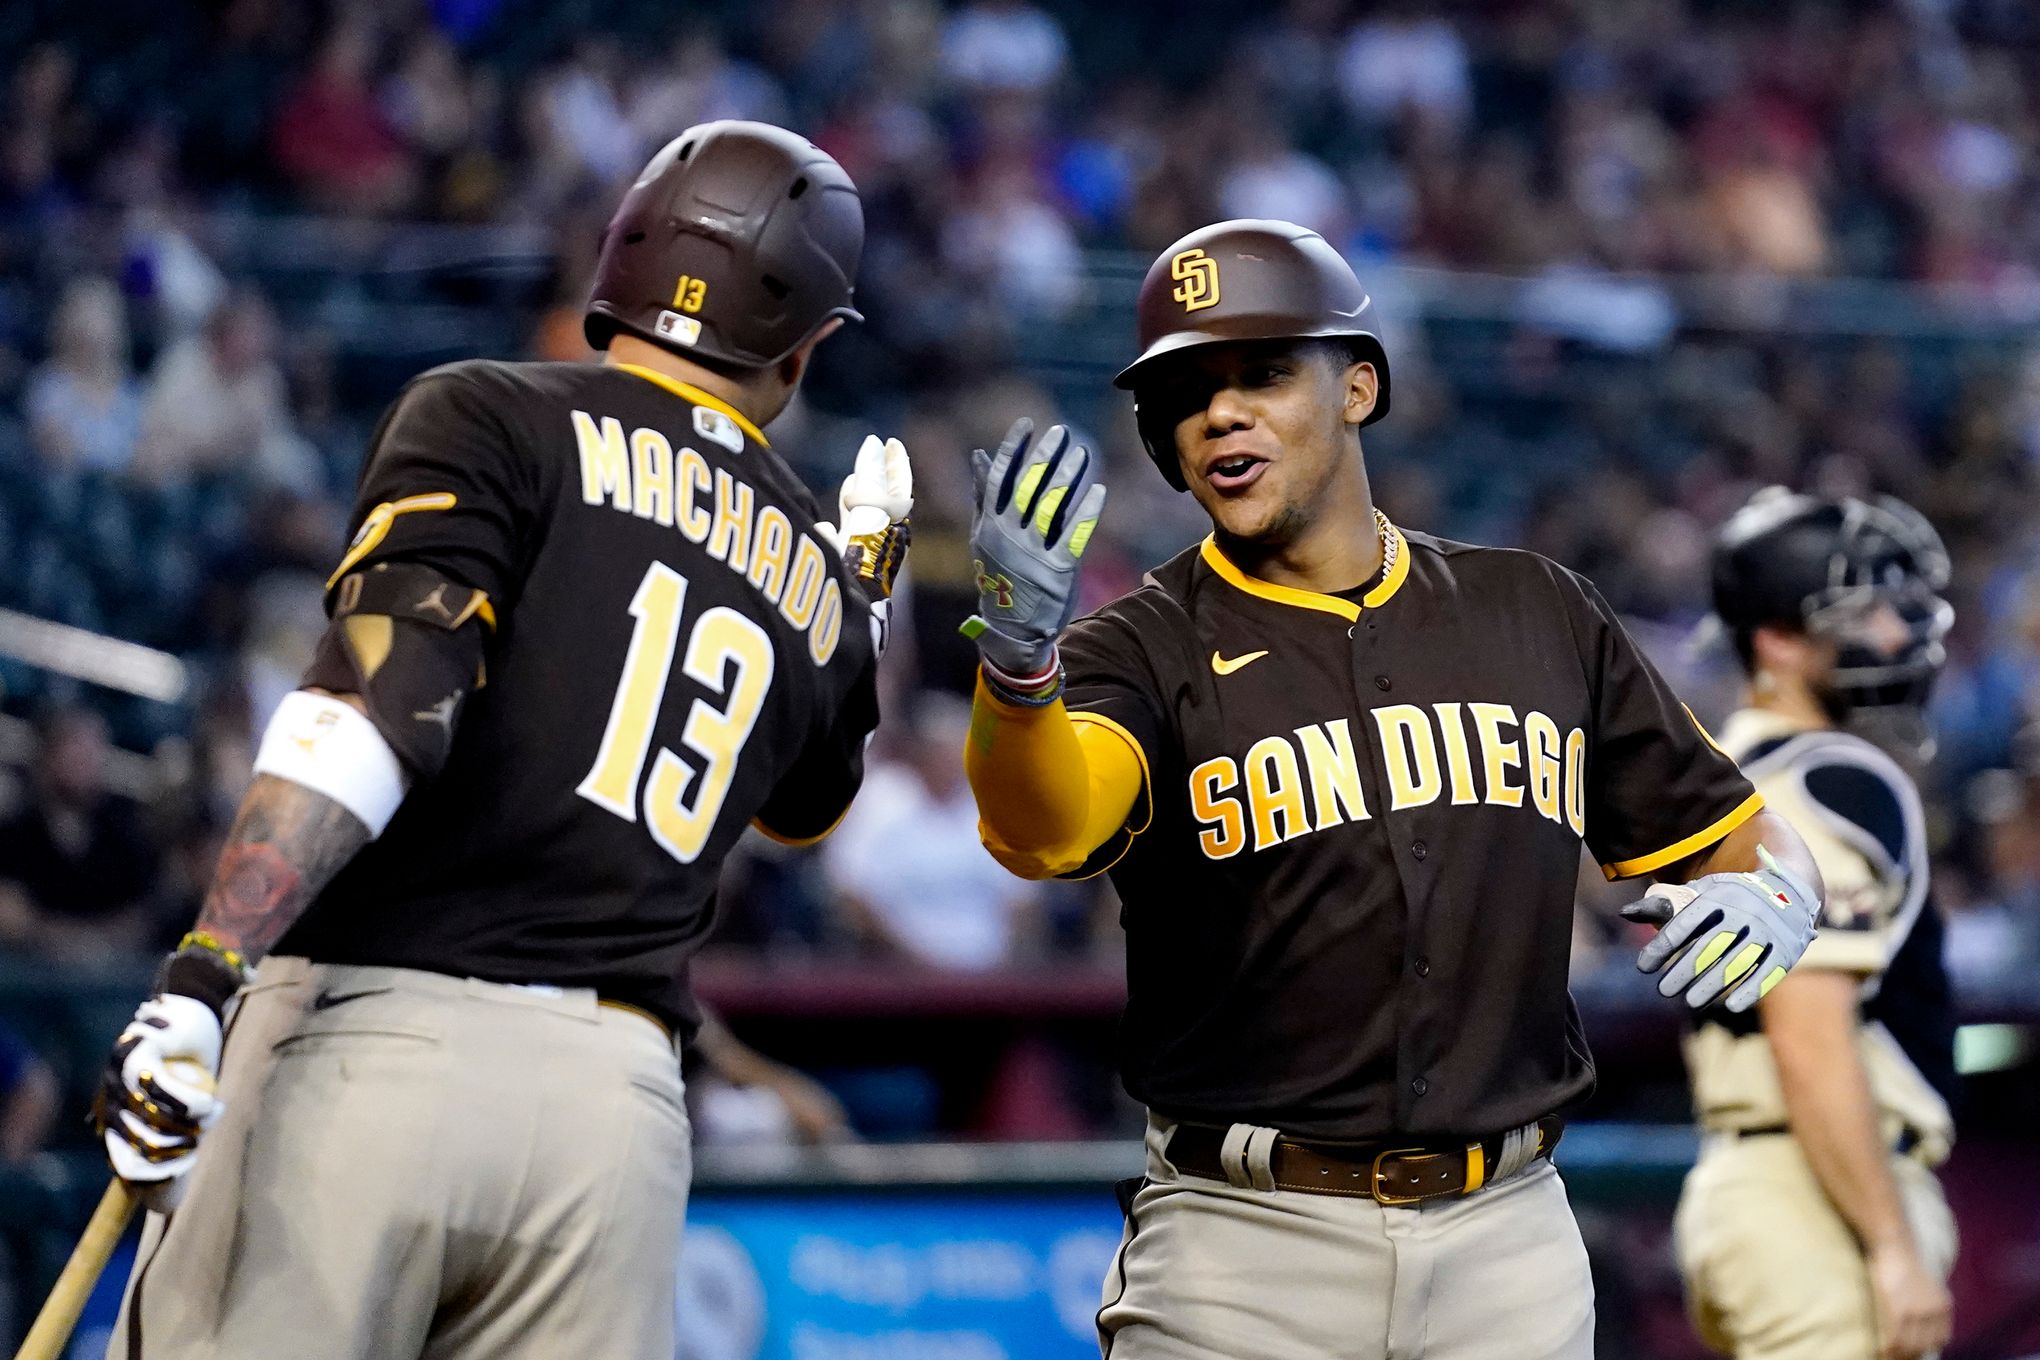 Machado drives in 2, Darvish pitches 6 innings for win as Padres